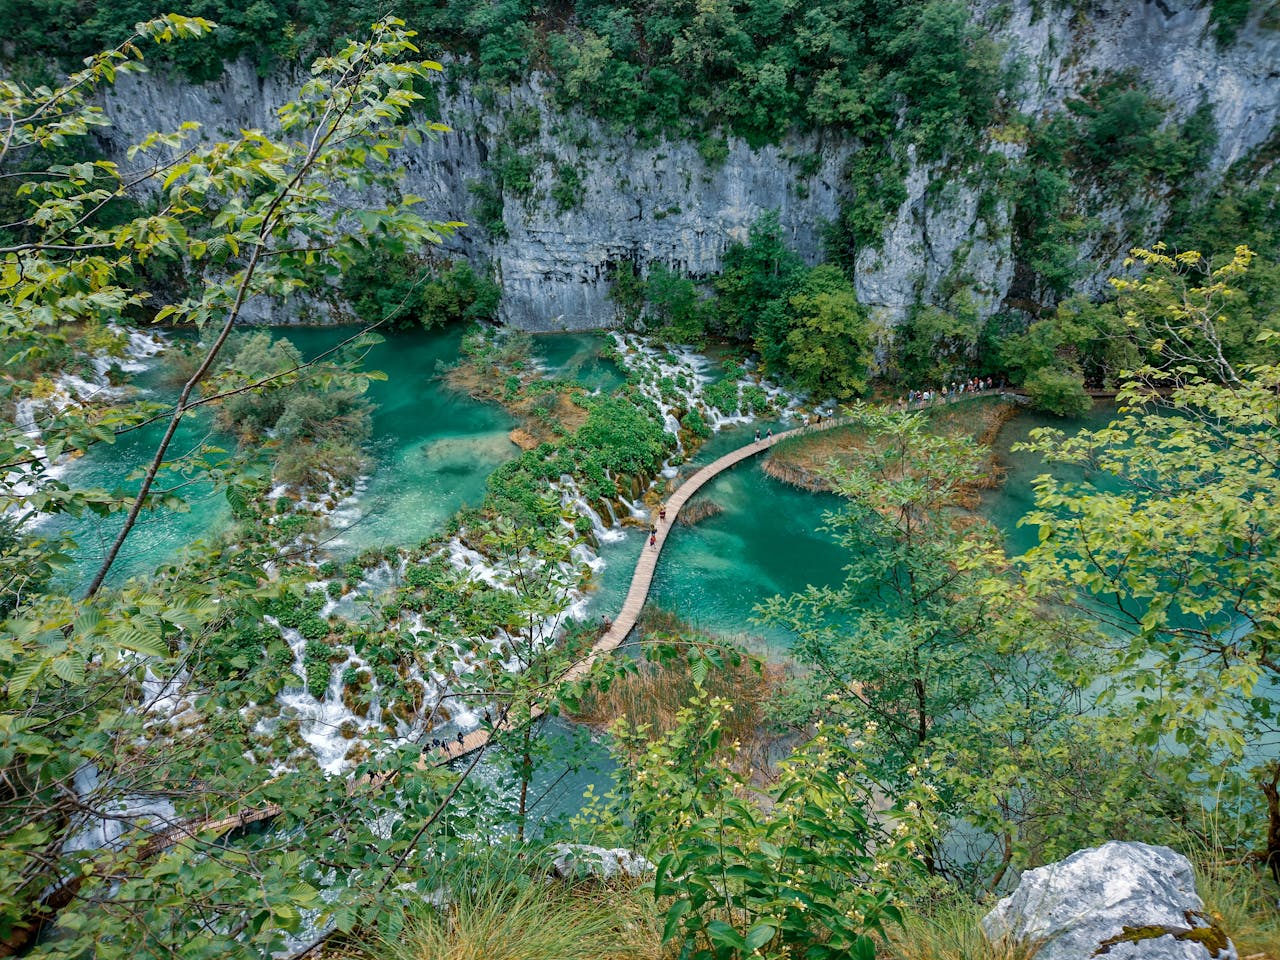 <p>Plitvice Lakes National Park is the oldest and largest national park in the Republic of Croatia, and boasts exceptional beauty.</p>  <p>It offers breathtaking waterfalls, crystal-clear lakes, mysterious caves and a plethora of wildlife. It is often considered the highlight of Croatia.</p>